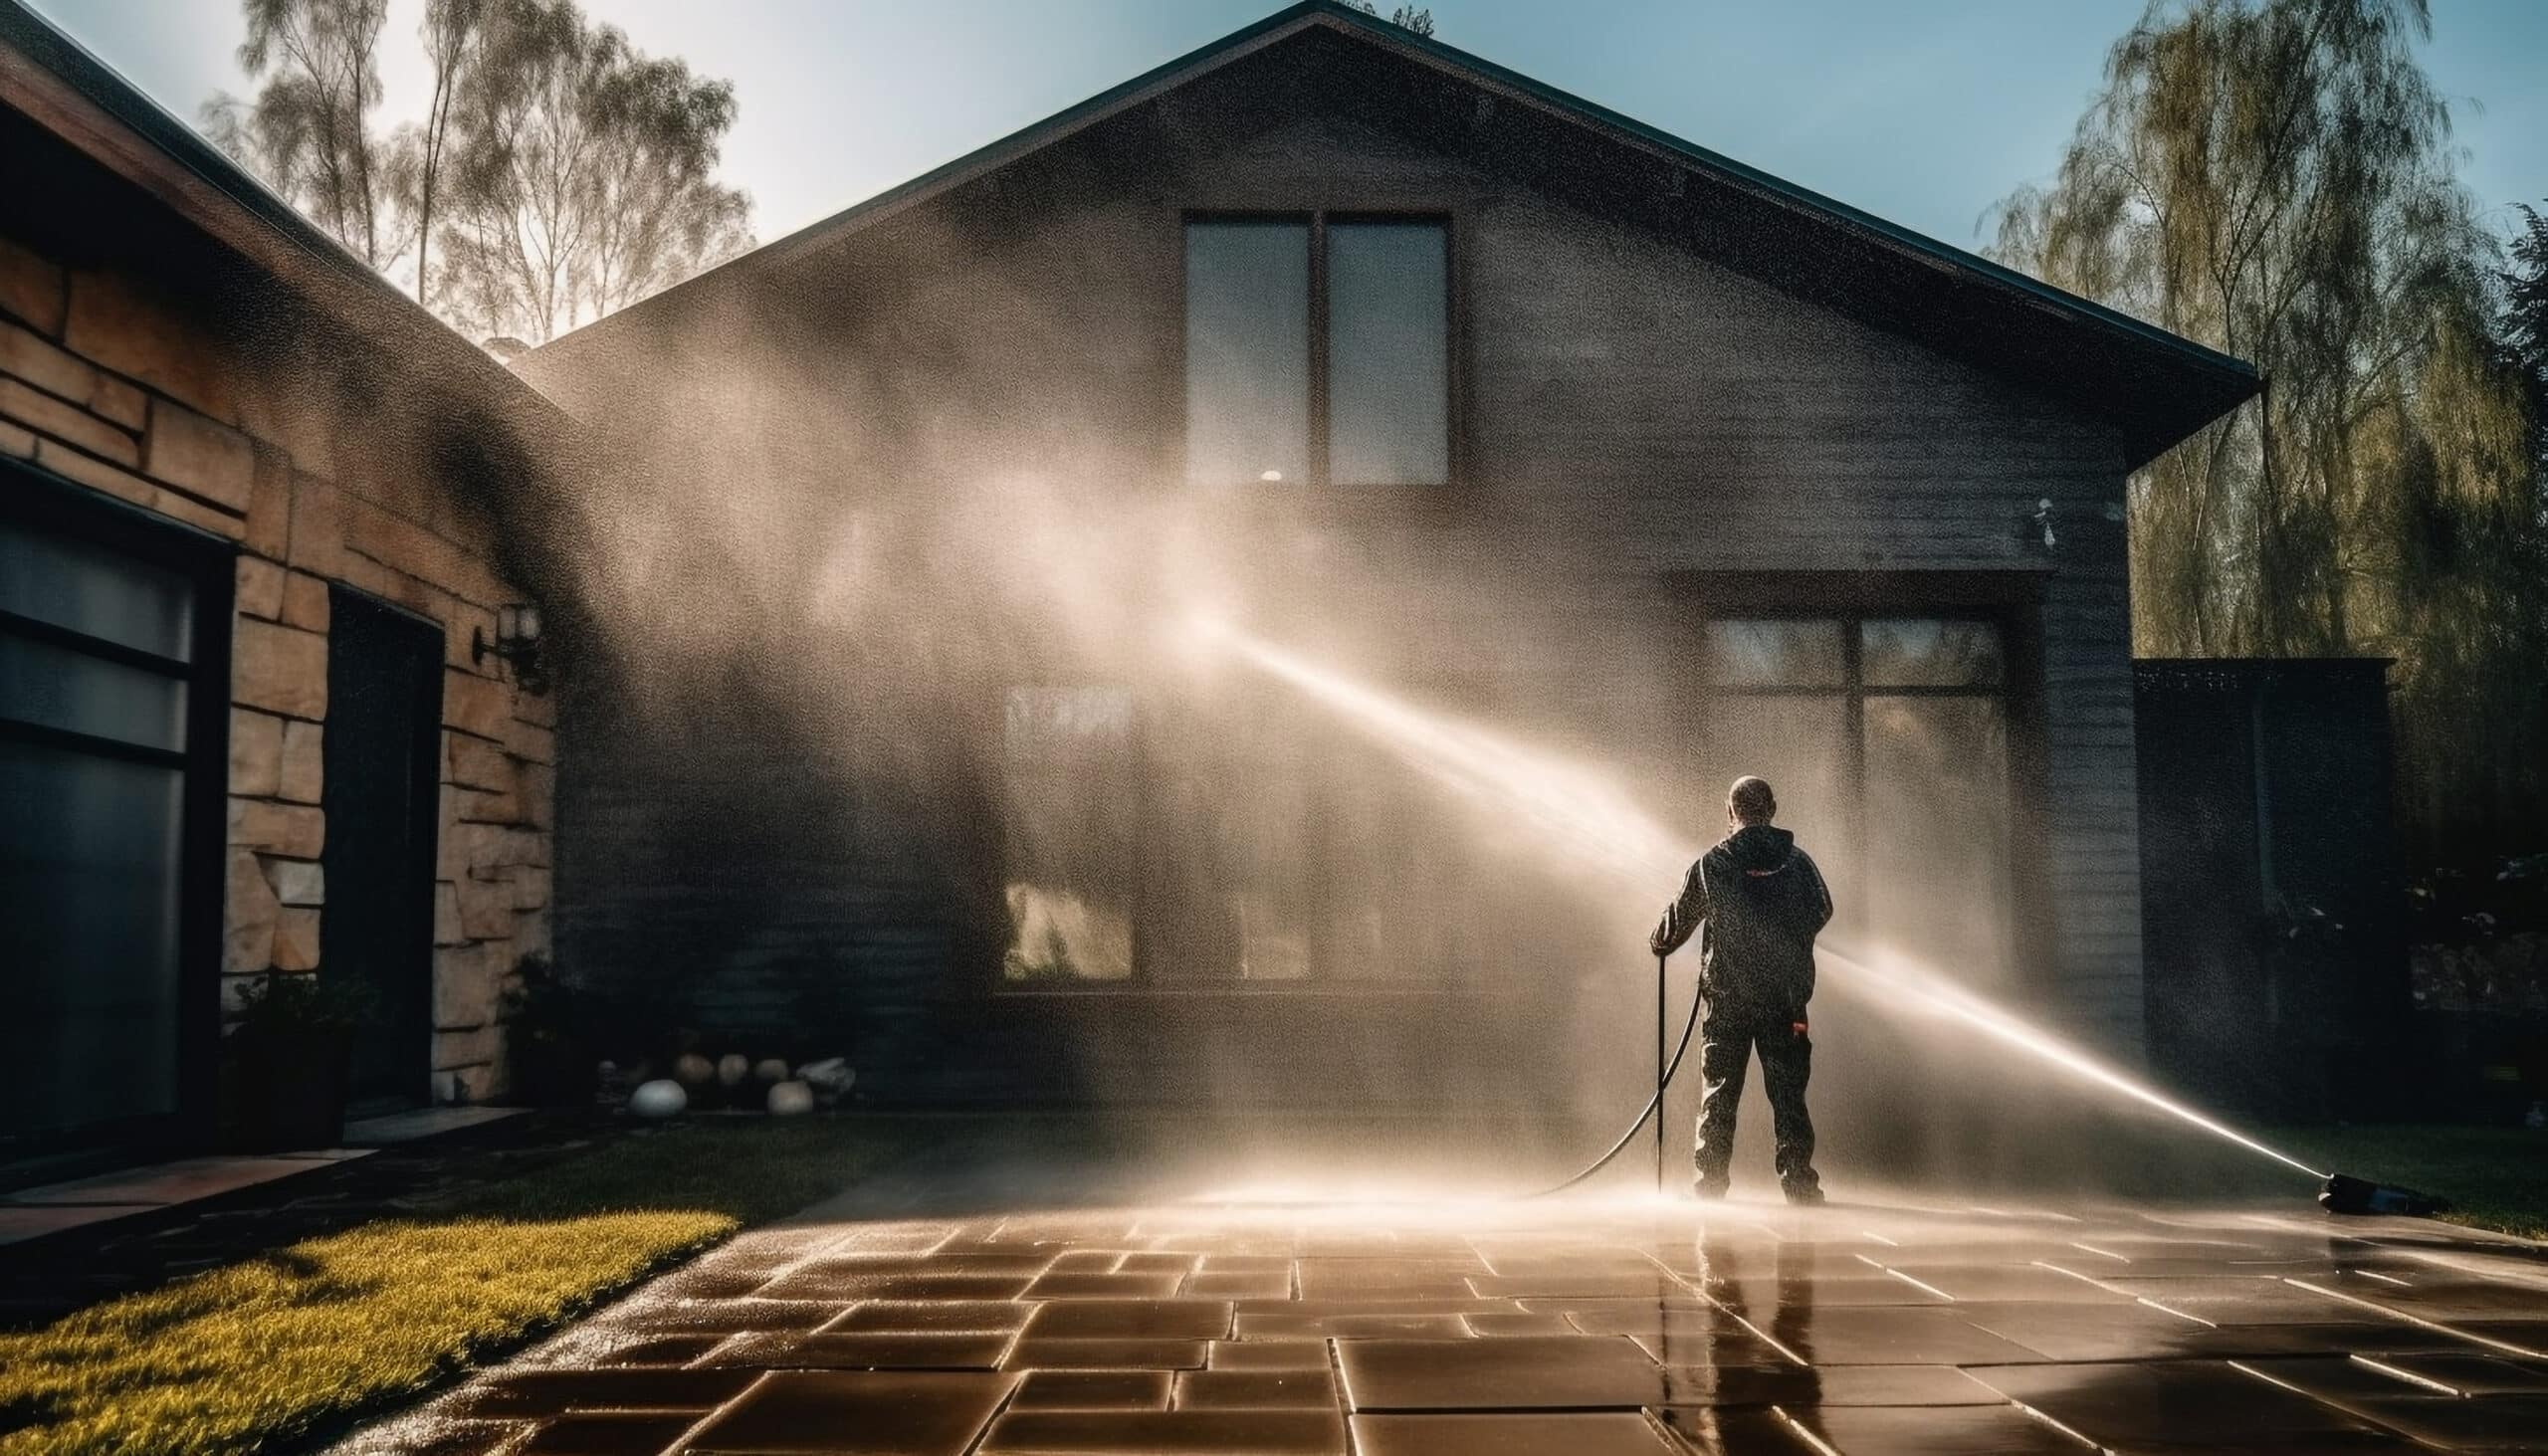 www.appr.com : What types of surfaces can I clean with a gasoline-powered pressure washer?